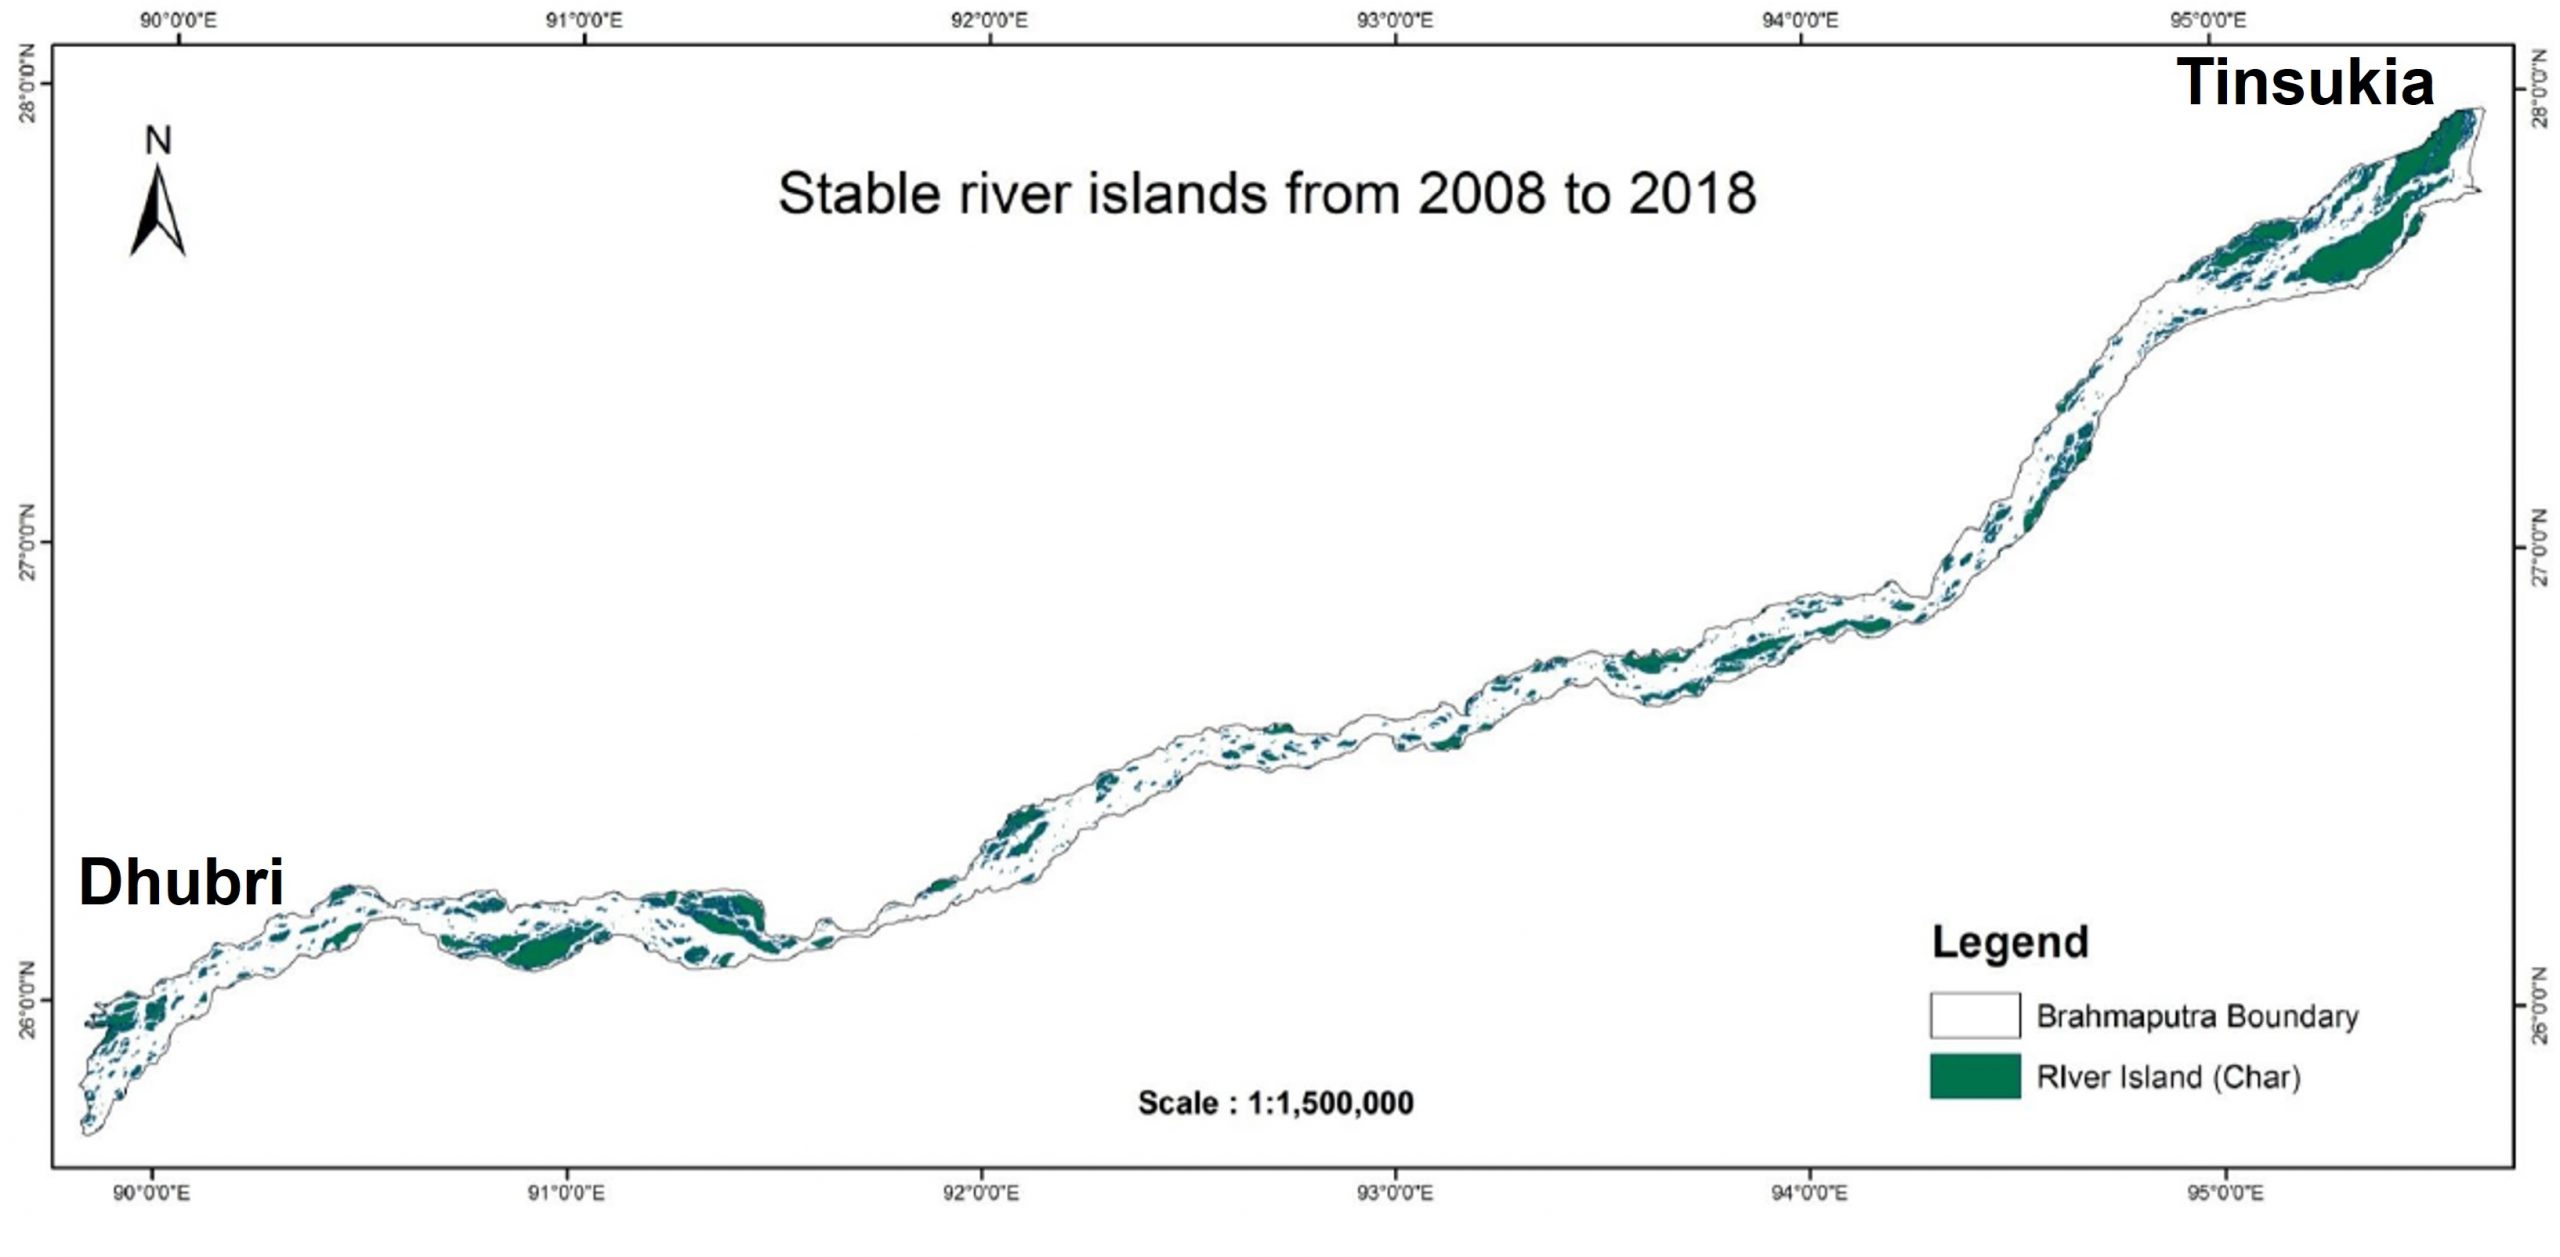 Stable island during 1988 to 2018 in Brahmaputra river